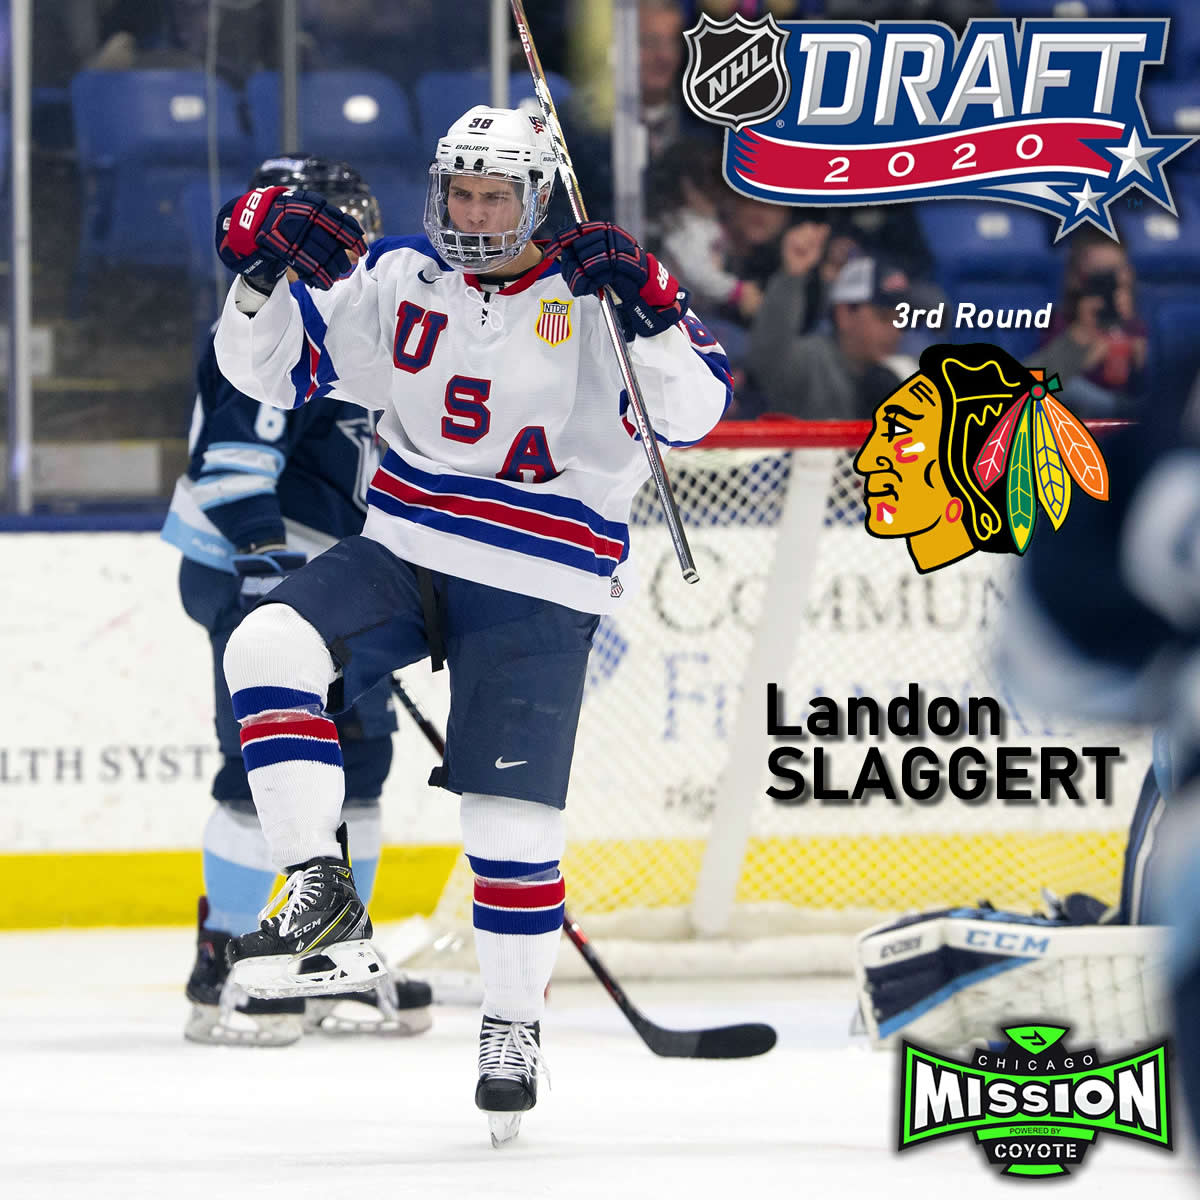 Mission Alum LANDON SLAGGERT drafted in 3rd Round in the 2020 NHL Draft